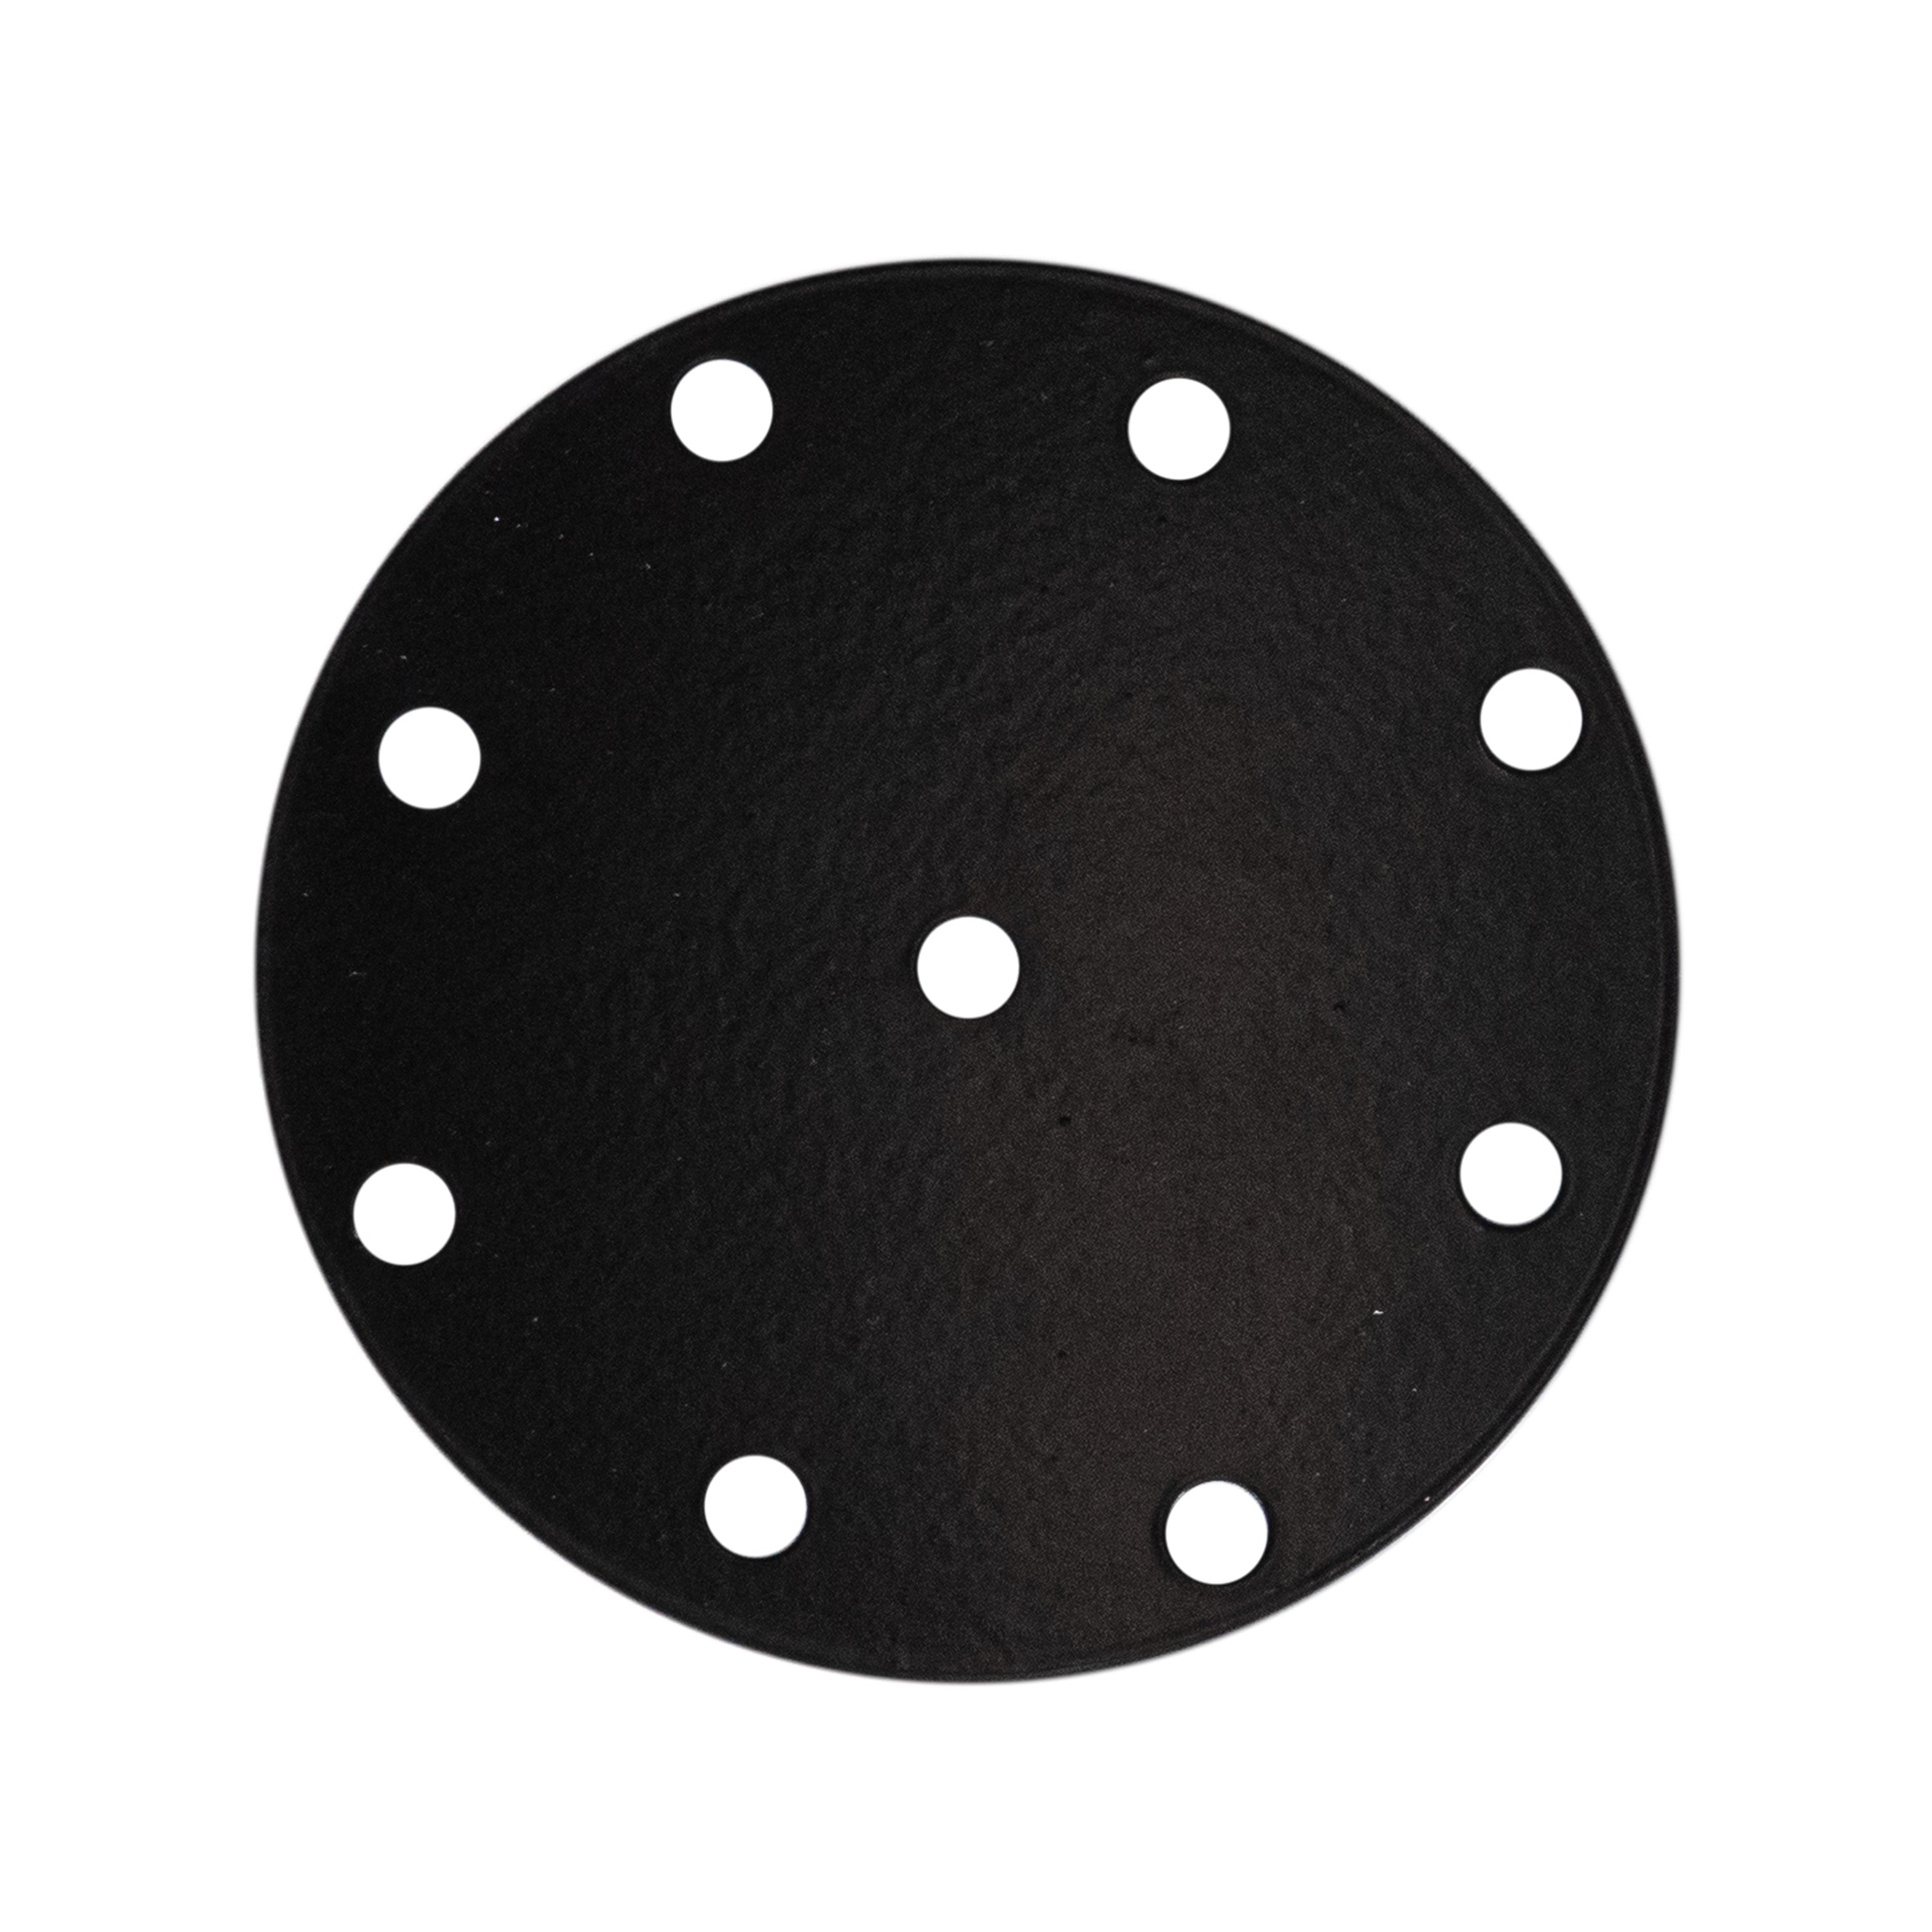 Underdeck Mounting Plate